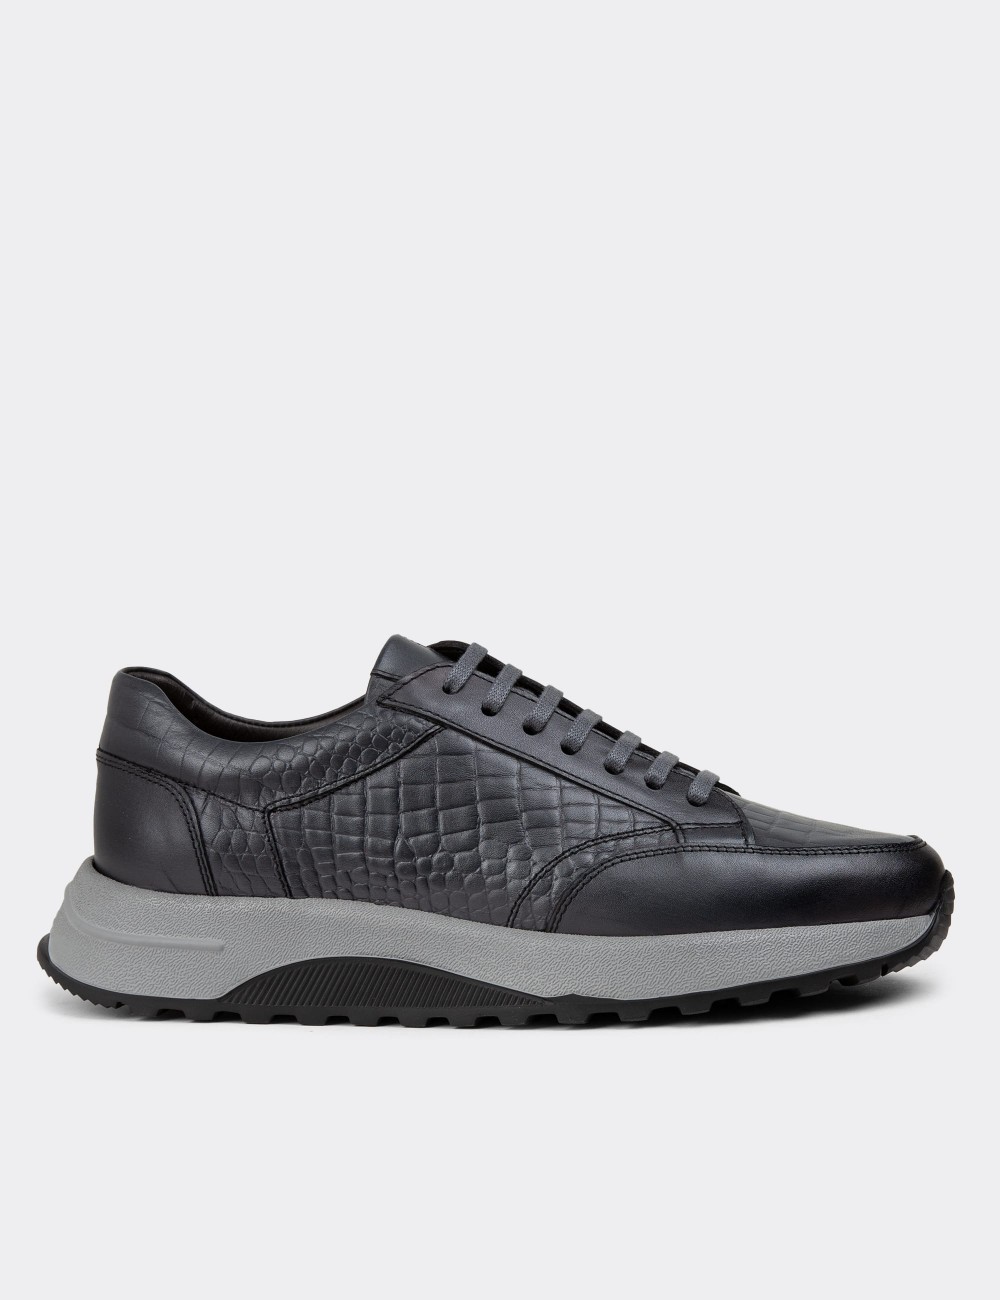 Gray Leather Sneakers - 01984MGRIE01